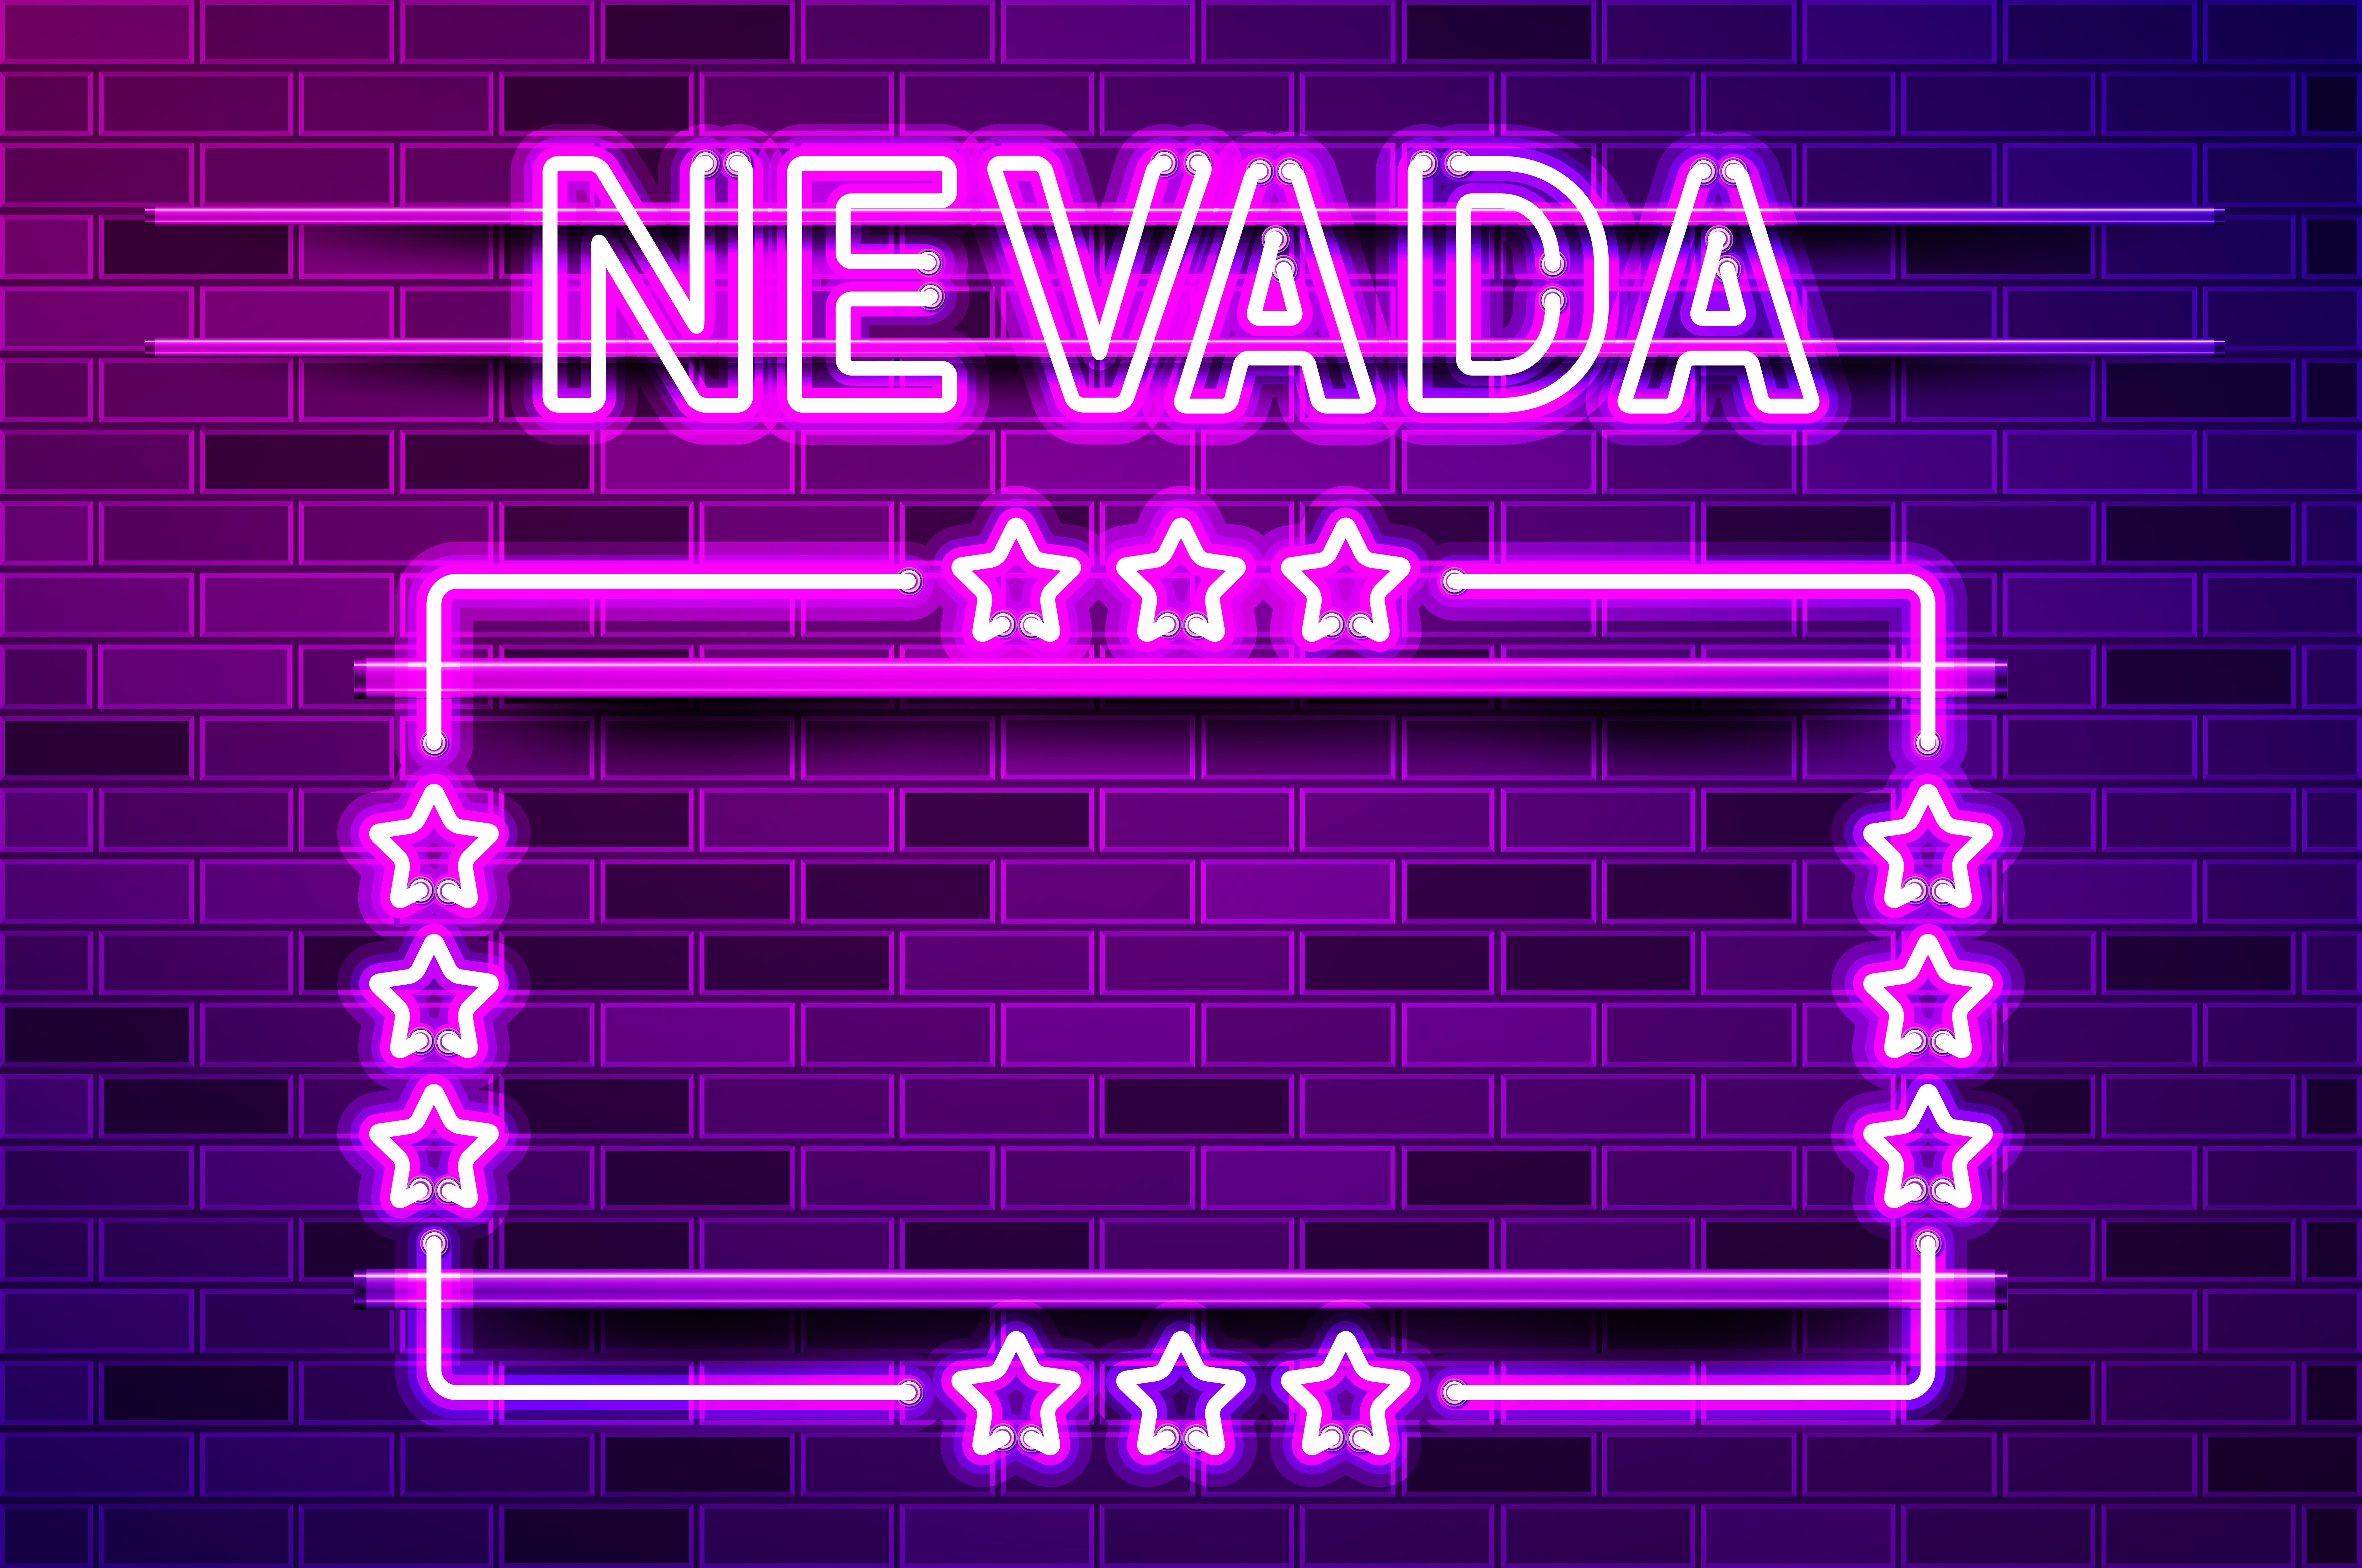 Nevada US State glowing purple neon lettering and a rectangular frame with stars. Realistic vector illustration. Purple brick wall, violet glow, metal holders.. Nevada US State glowing purple neon lettering and a rectangular frame with stars